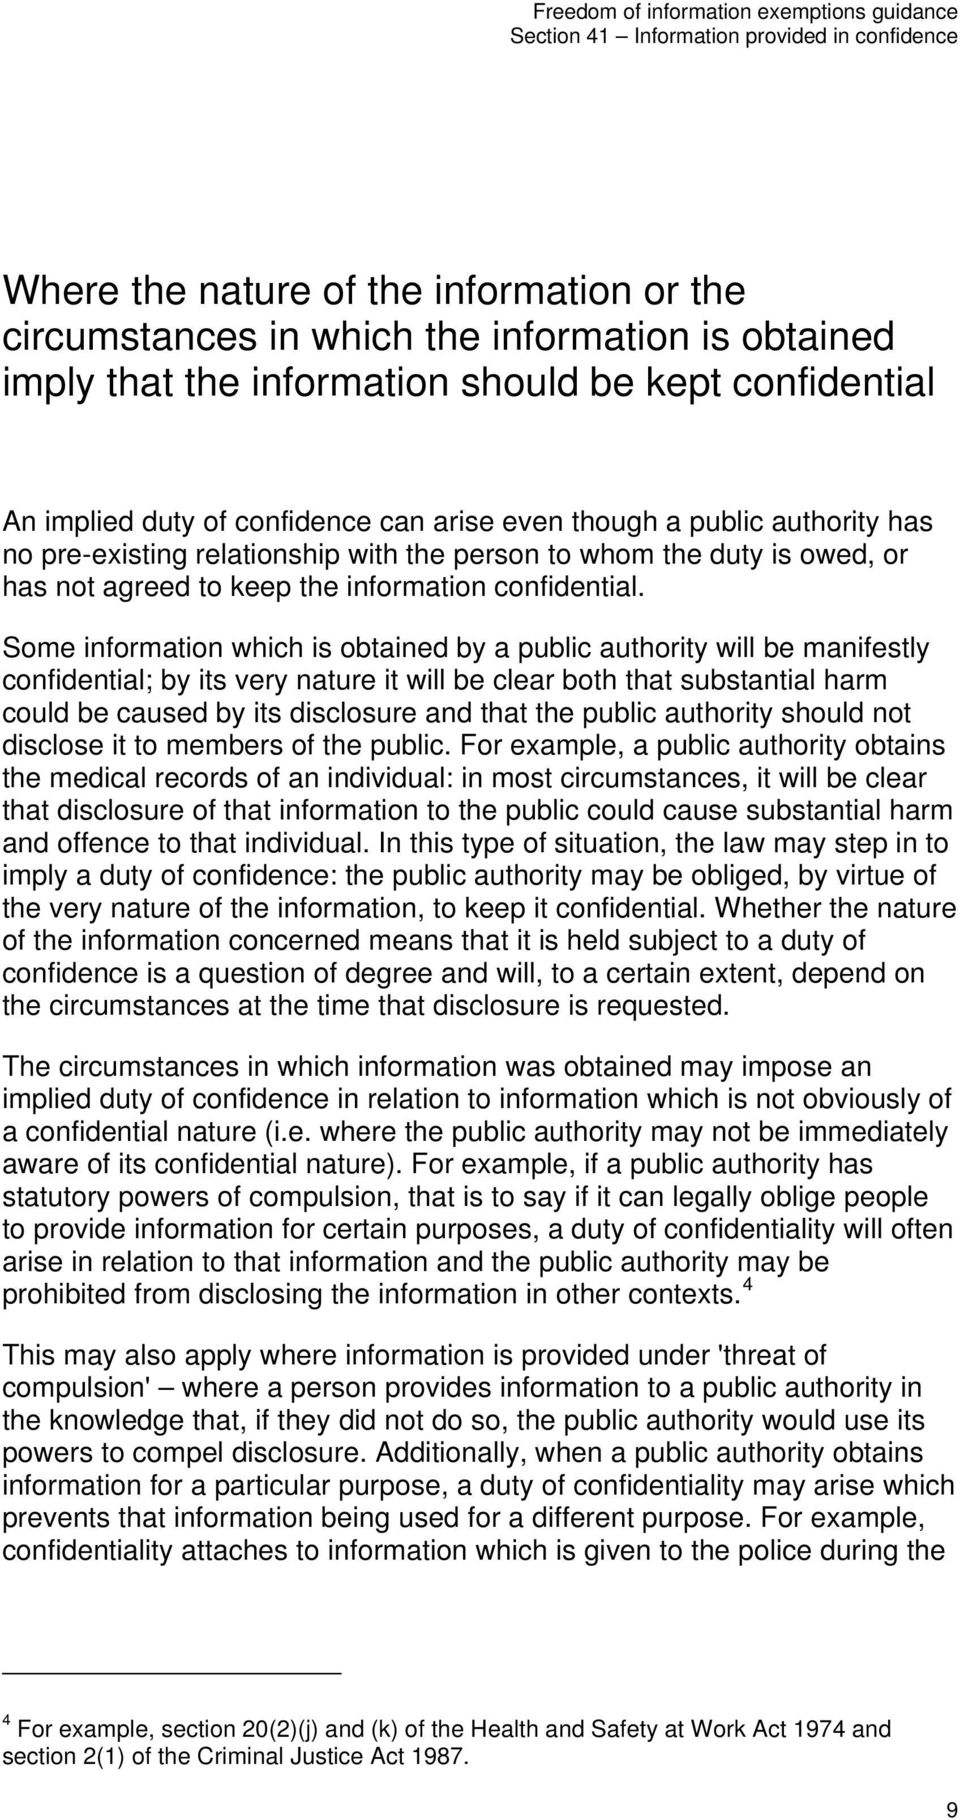 Some information which is obtained by a public authority will be manifestly confidential; by its very nature it will be clear both that substantial harm could be caused by its disclosure and that the